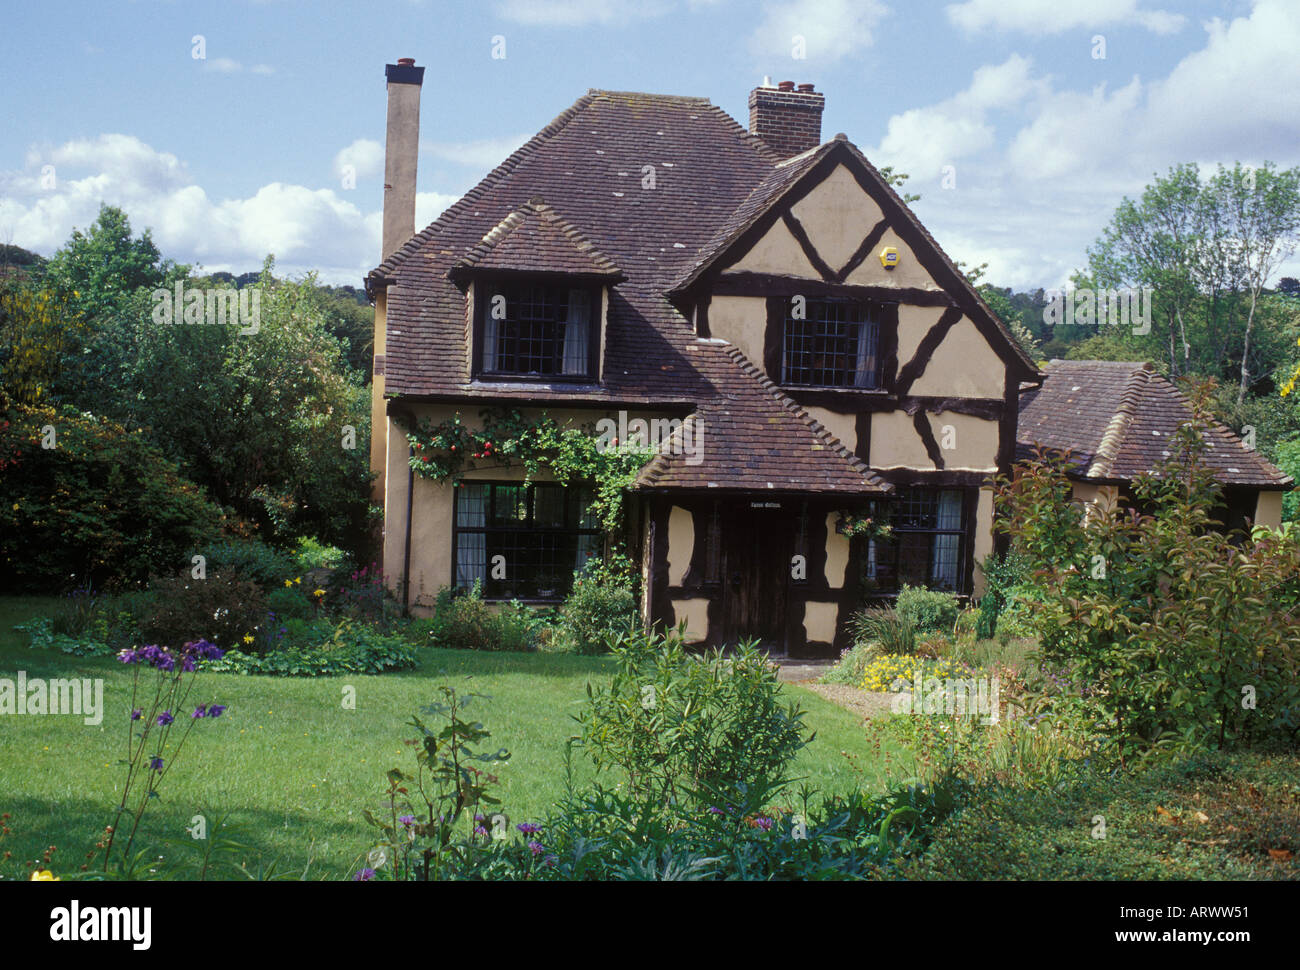 Kingswood, Surrey, England  Pre 1930 mock Tudor style half timbered cottage with garage set in lush garden Stock Photo